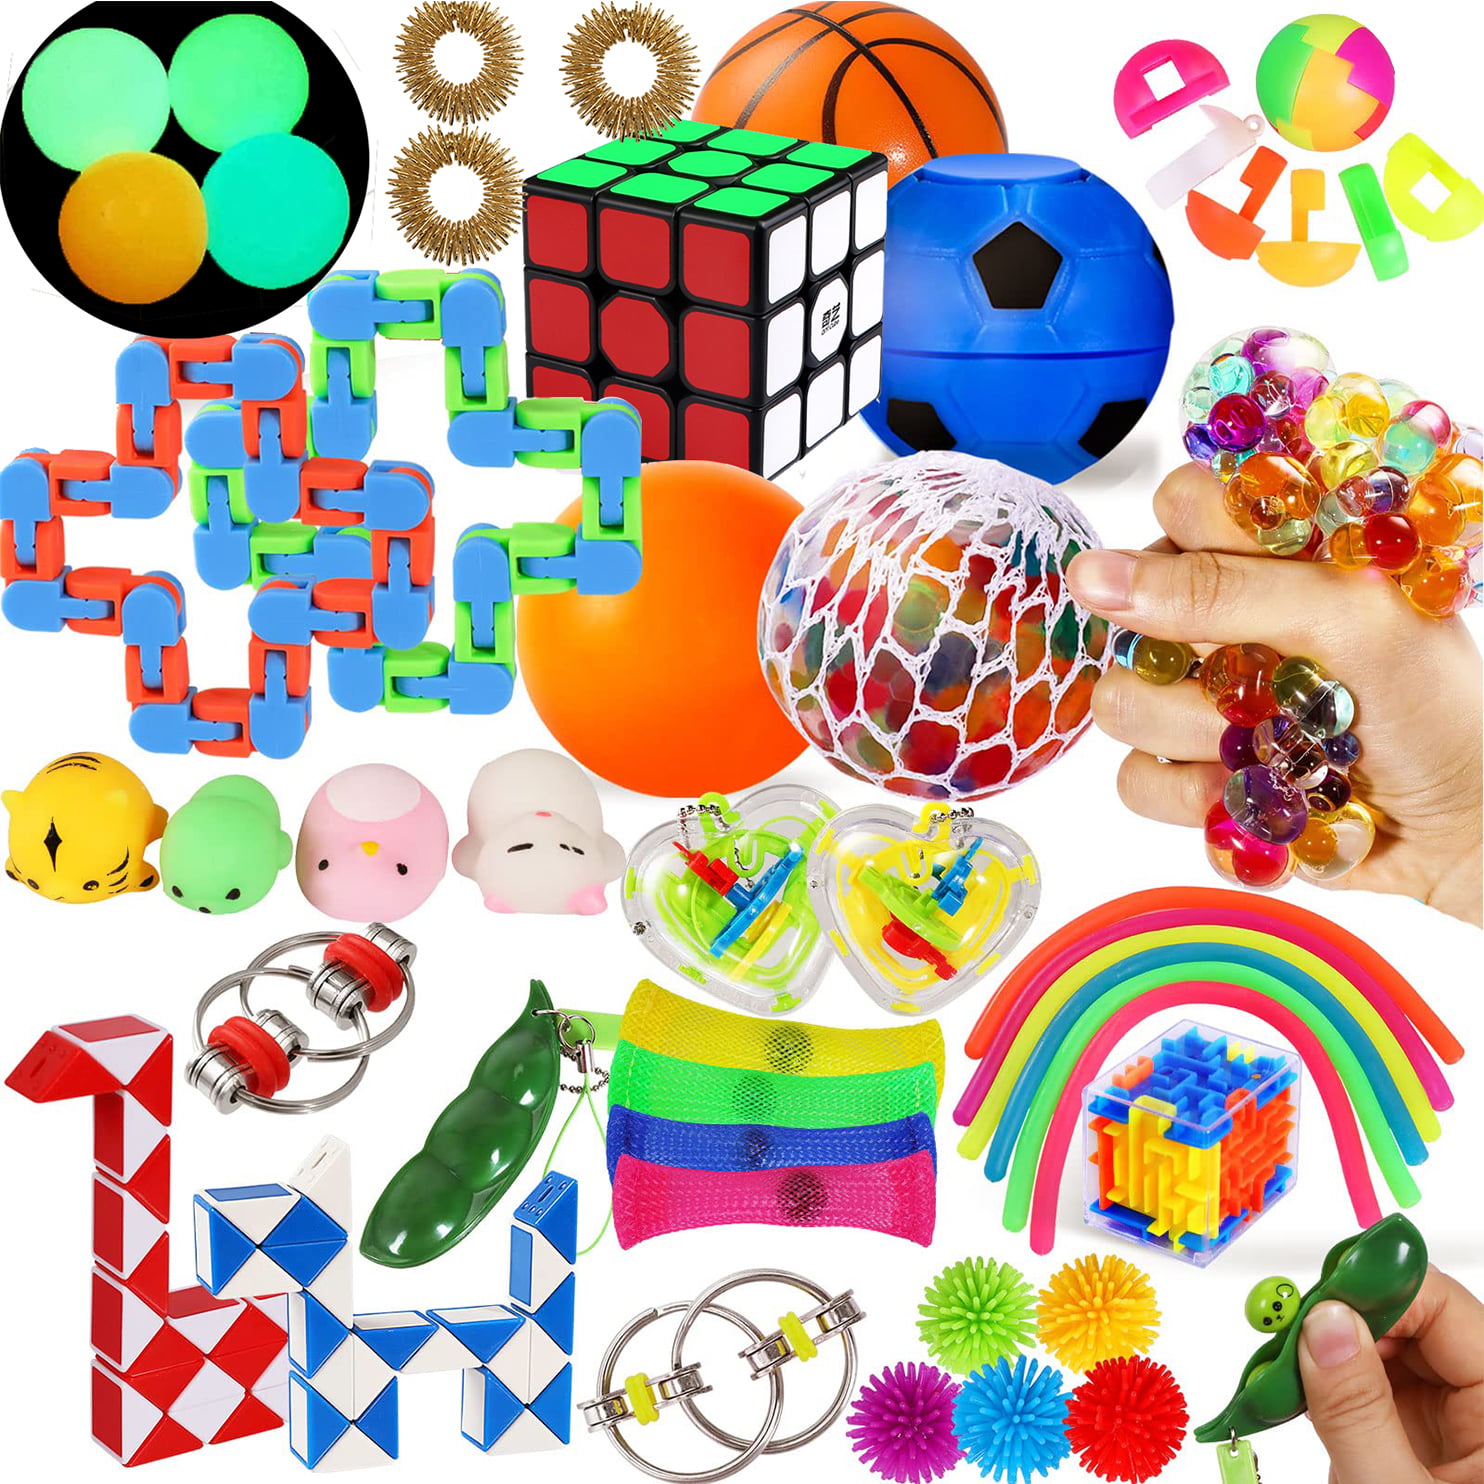 Details about   42 Pcs Sensory Fidget Toys Set Stress Relief and Anti Anxiety Tools Bundle Toys 